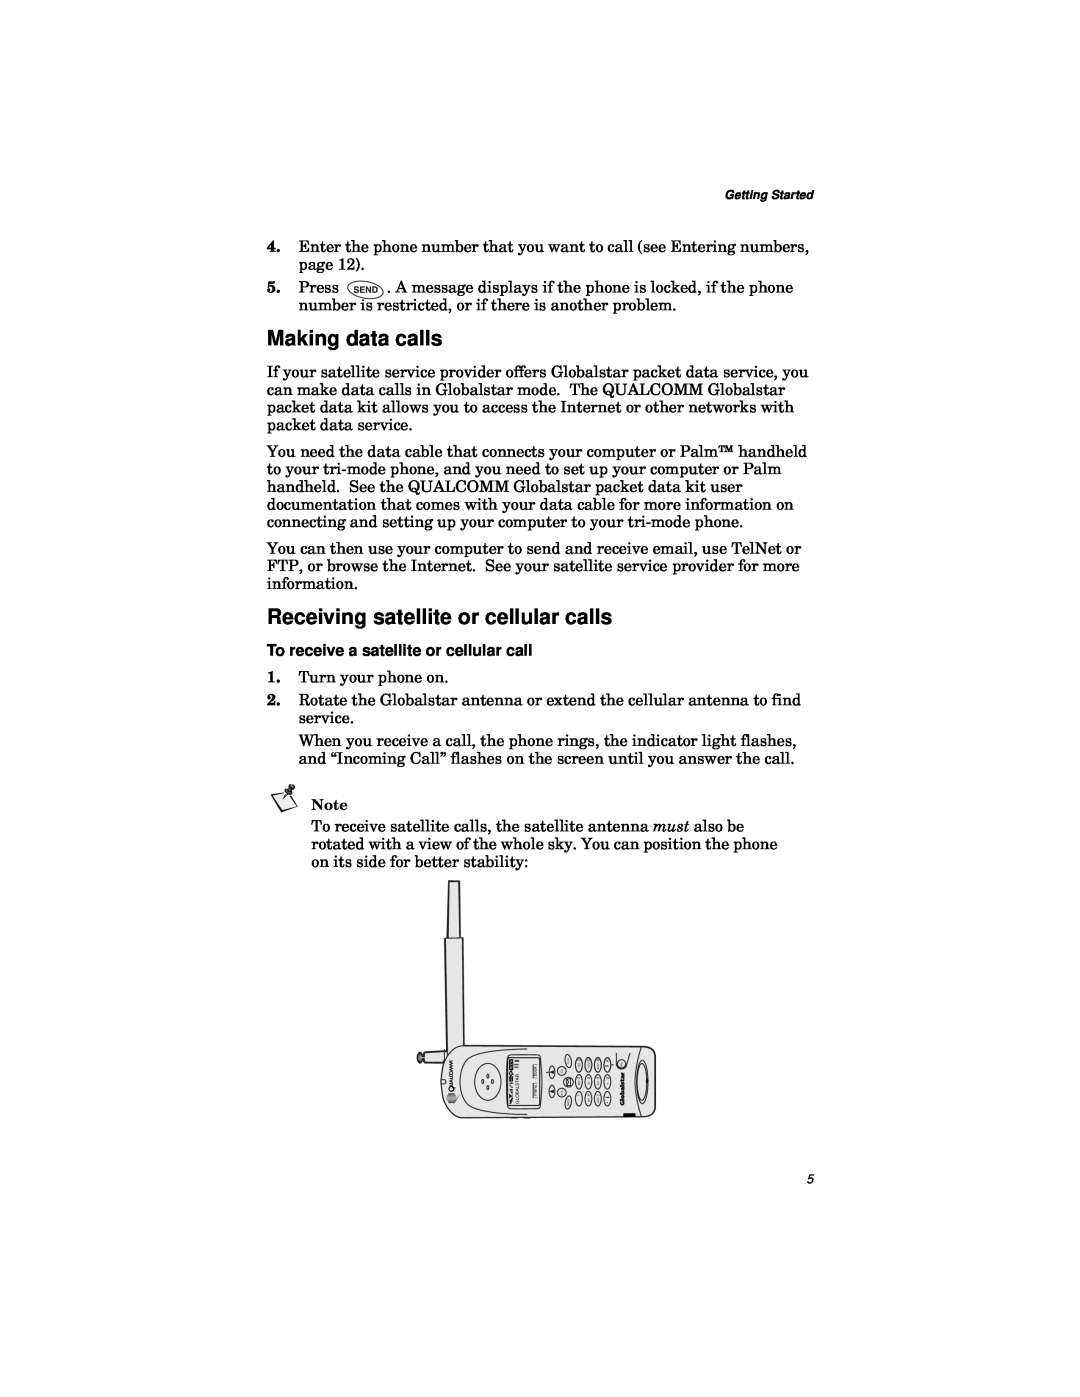 Qualcomm GSP-1600 manual Making data calls, Receiving satellite or cellular calls, To receive a satellite or cellular call 